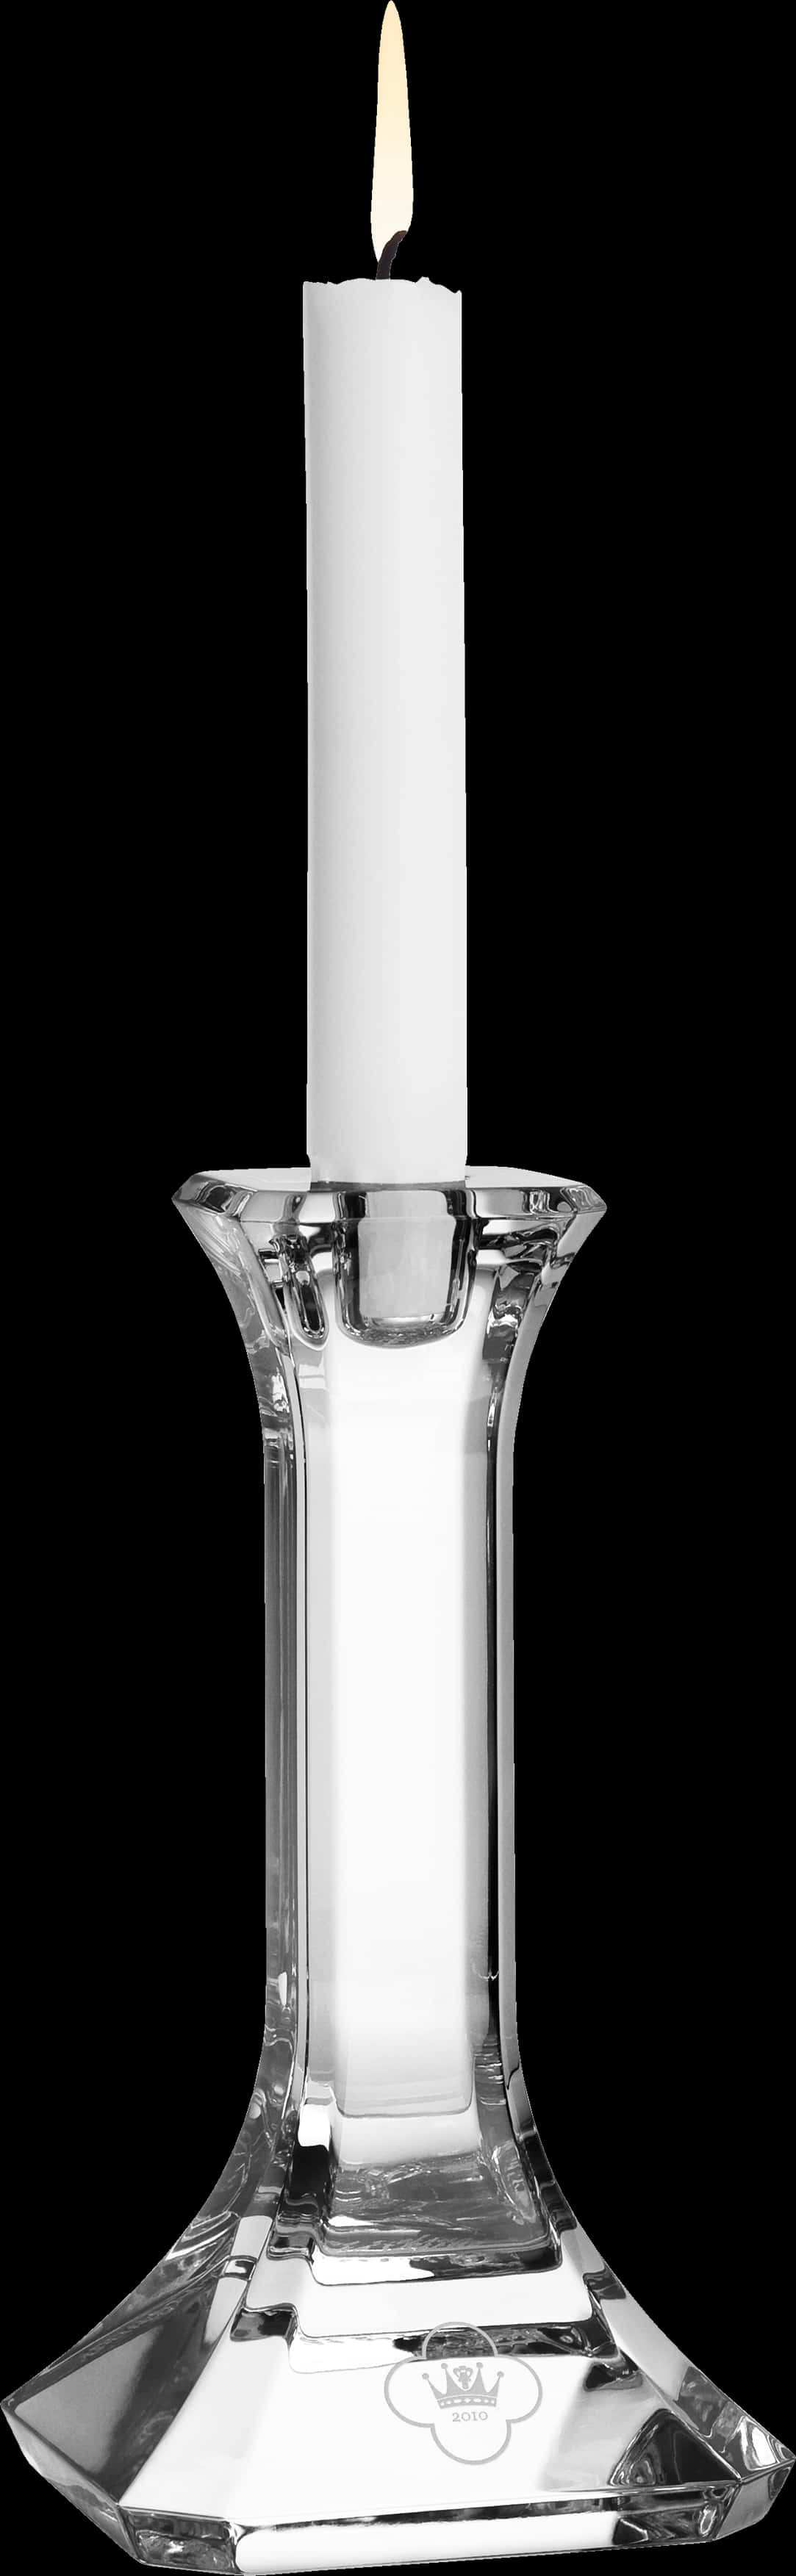 A Clear Candle Holder With A White Candle